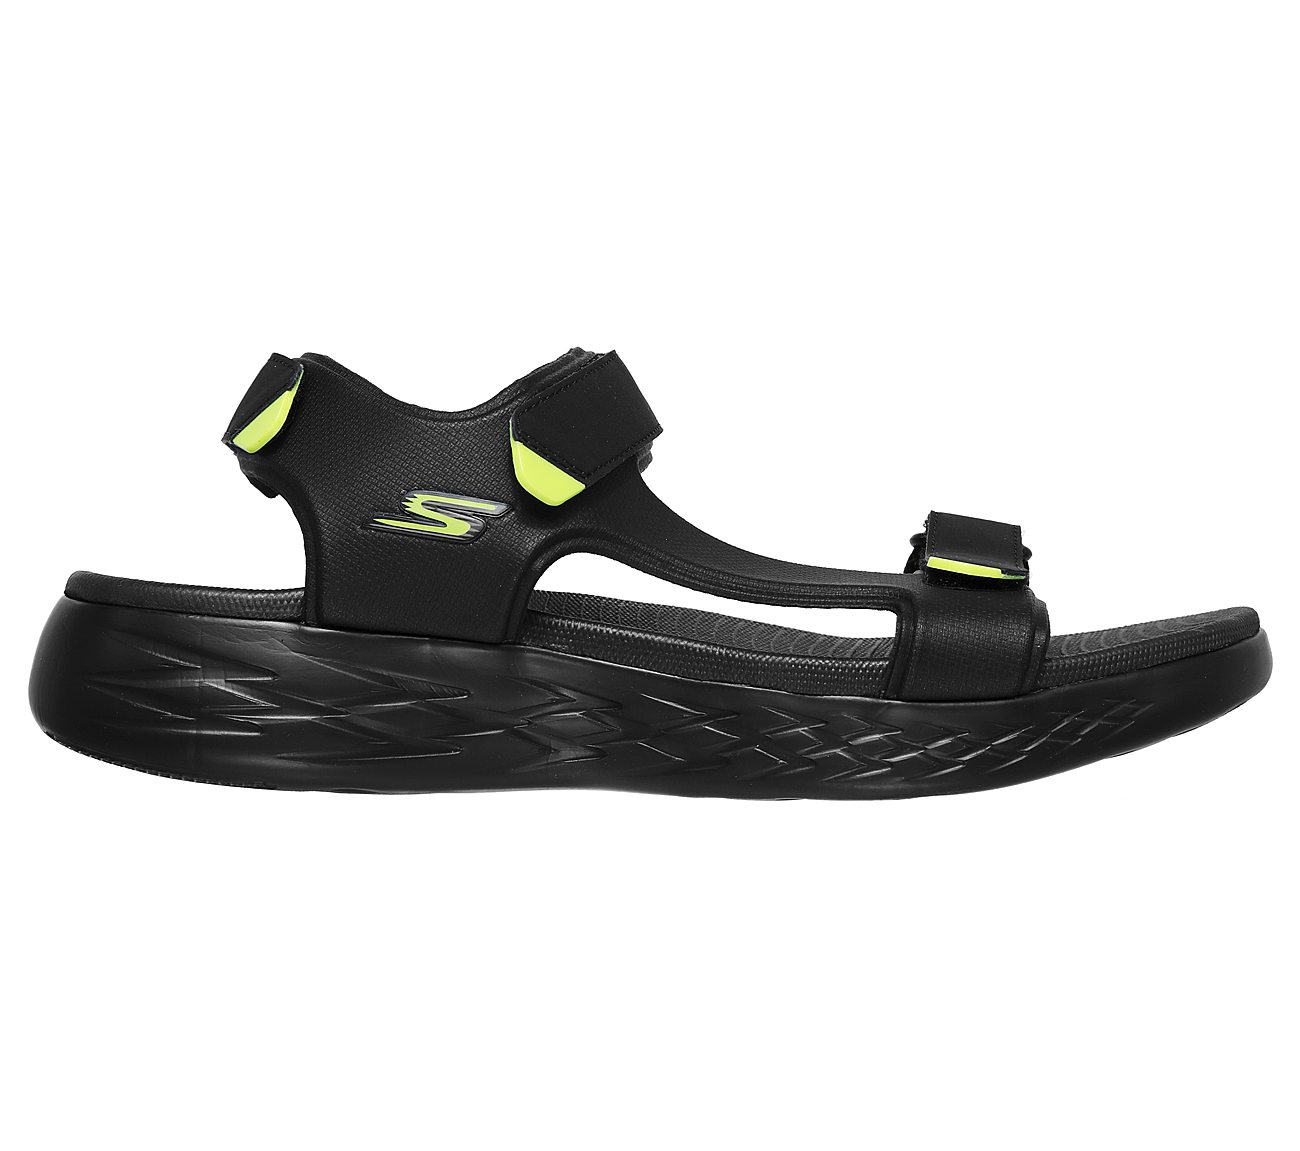 ON-THE-GO 600 - VENTURE, BLACK/LIME Footwear Right View